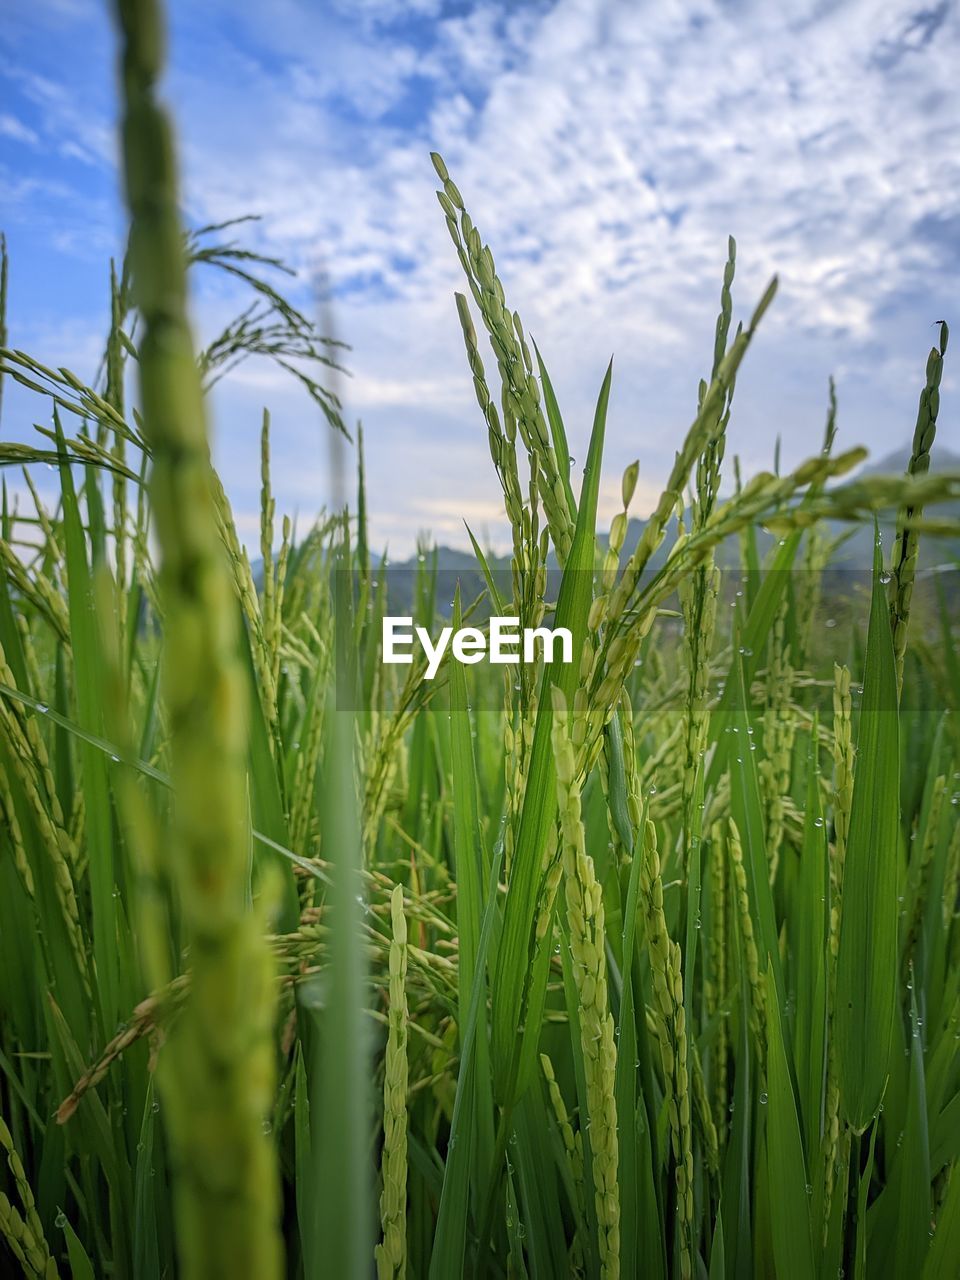 green, plant, grass, agriculture, field, crop, landscape, cereal plant, rural scene, growth, land, sky, nature, cloud, paddy field, grassland, farm, meadow, environment, food, prairie, beauty in nature, no people, food and drink, corn, plant stem, barley, outdoors, day, tranquility, flower, sunlight, scenics - nature, vegetable